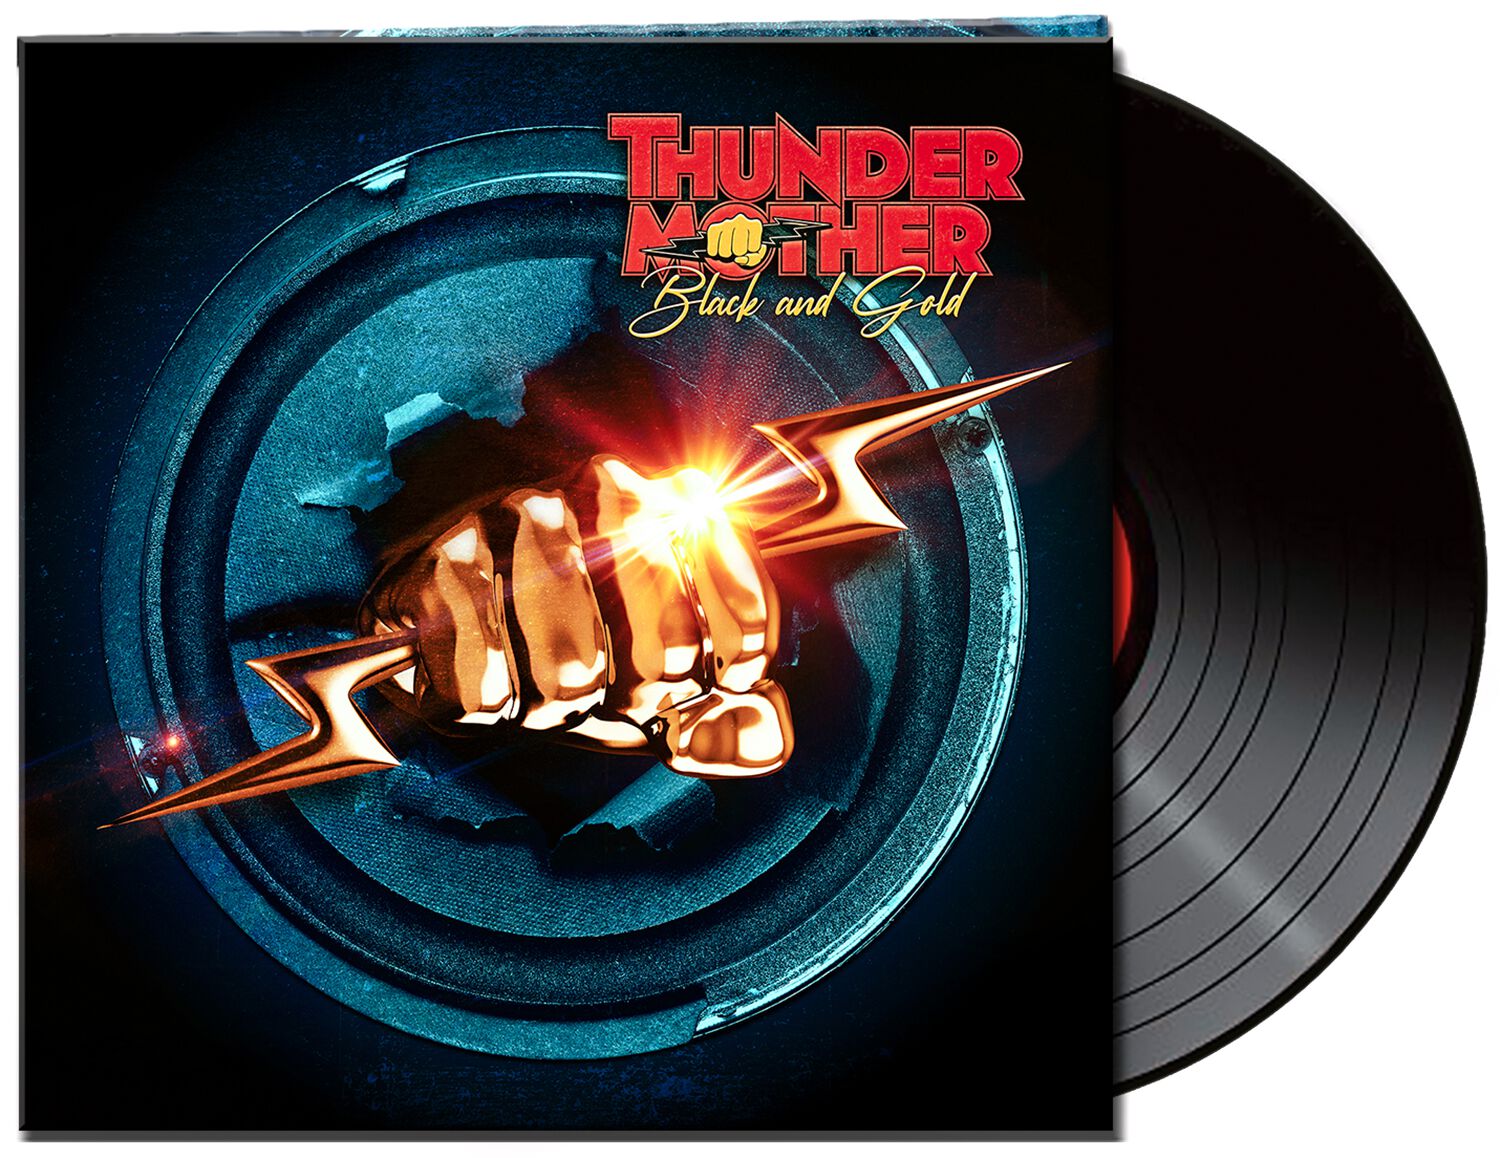 Thundermother Black and gold LP black